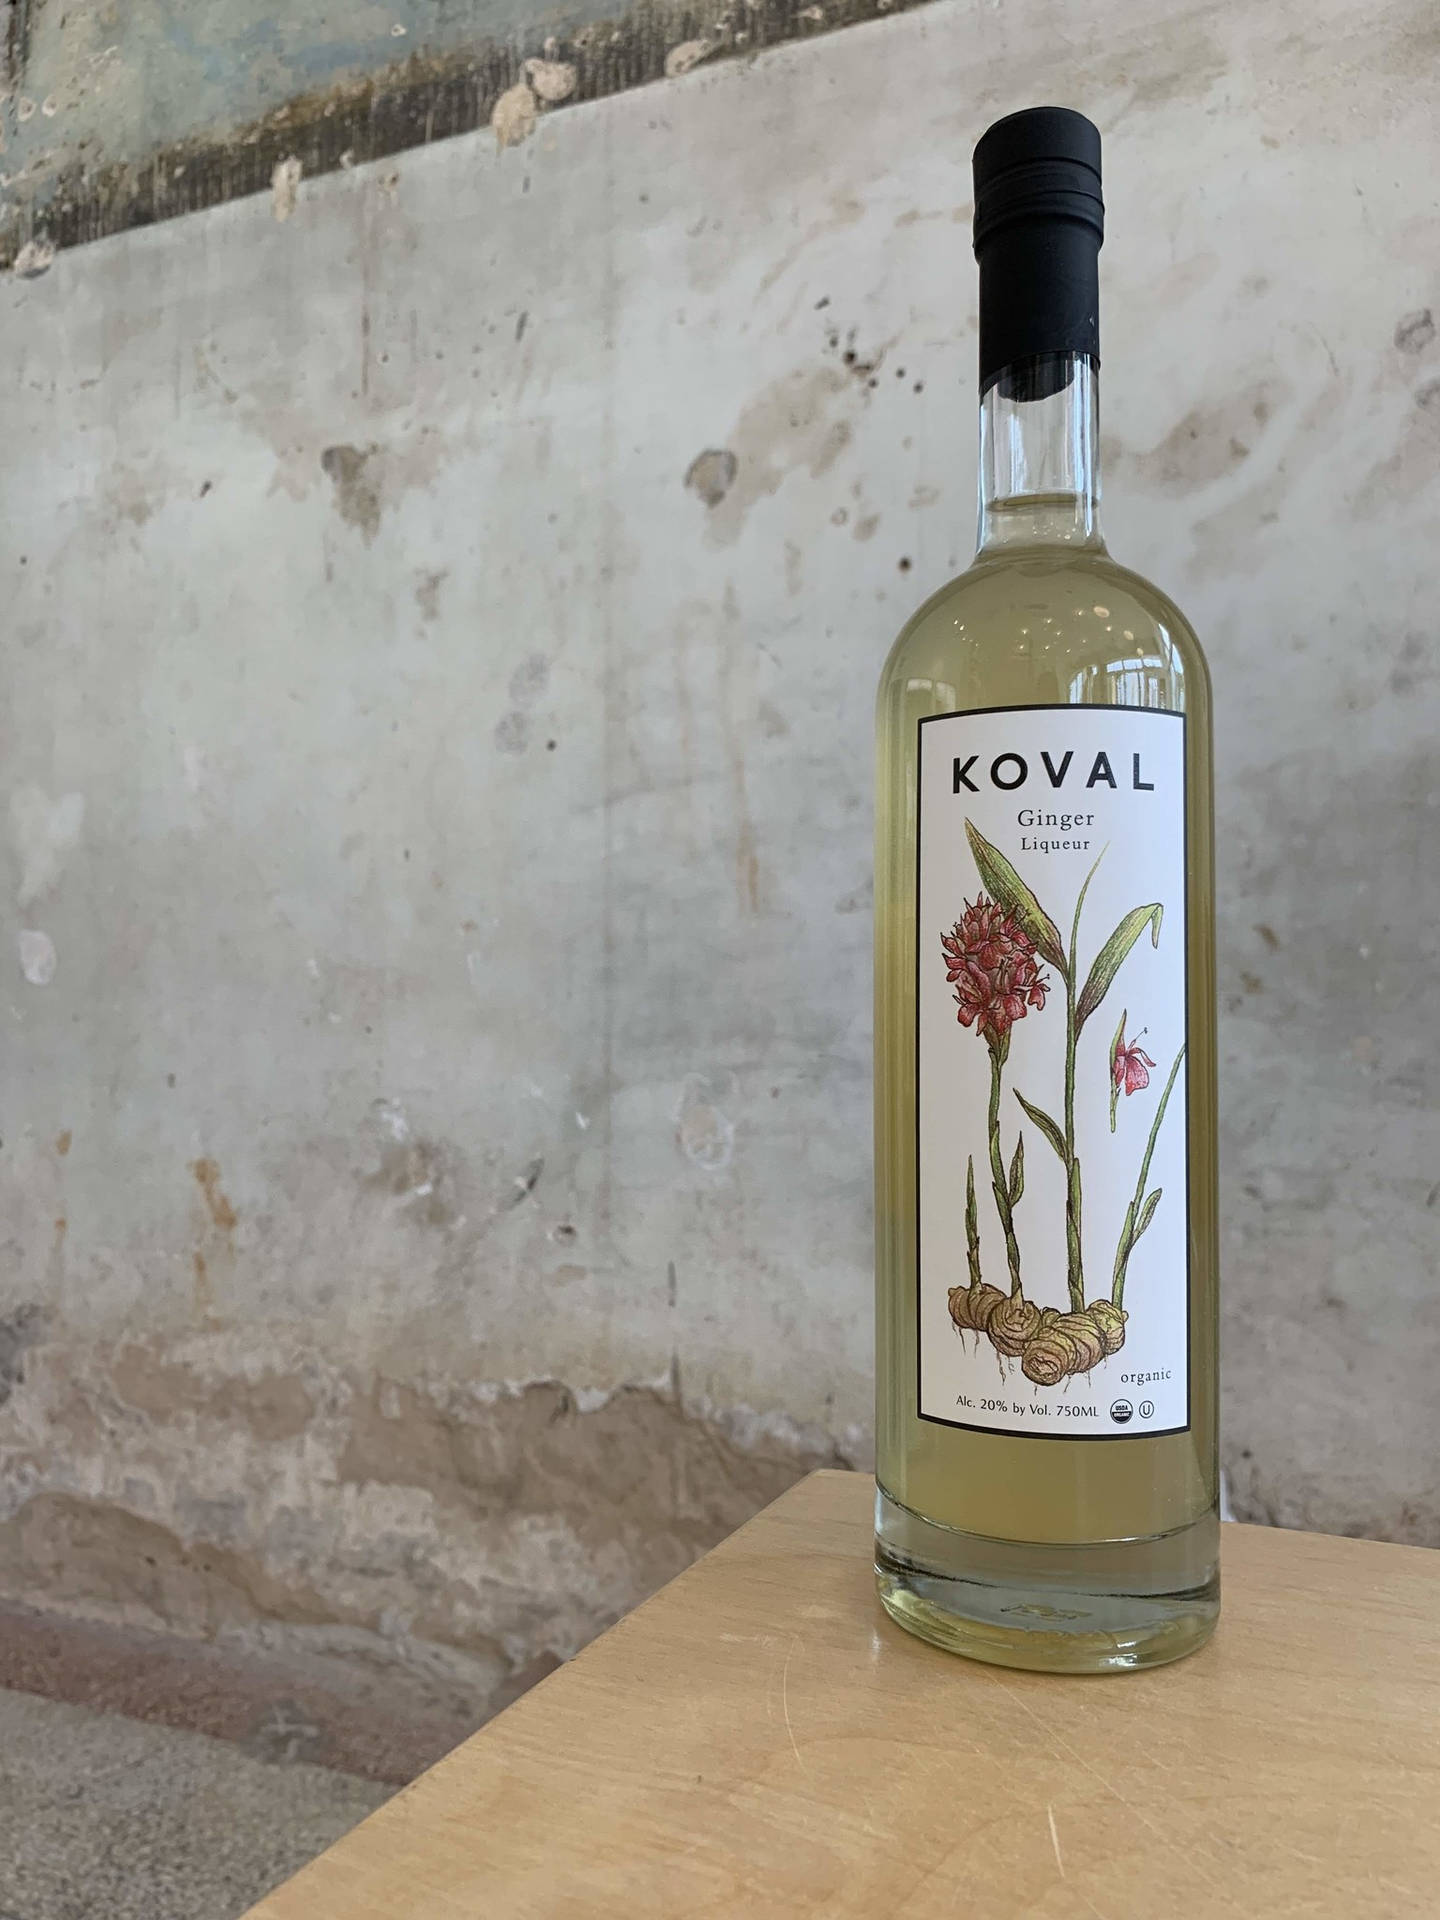 Koval Ginger Liqueur At The Table Wallpaper